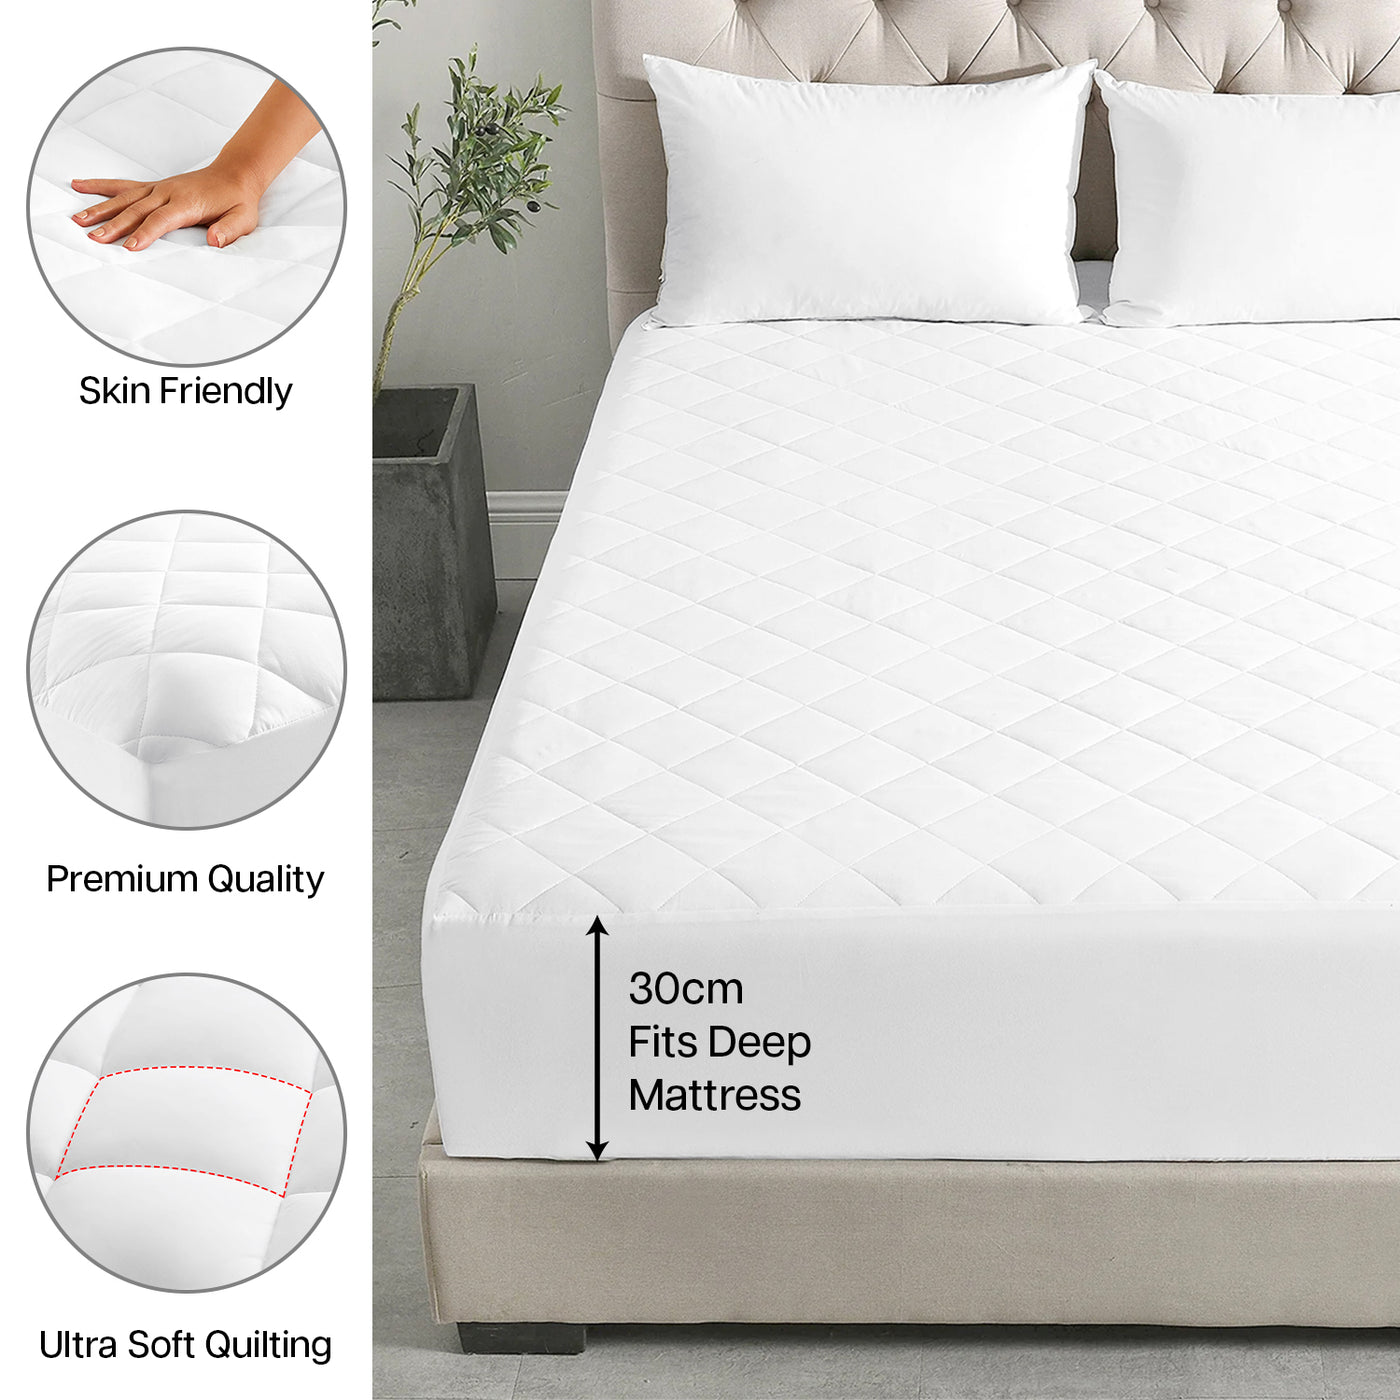 King Size Mattress Protector Cover Extra Deep Quilted Skirt